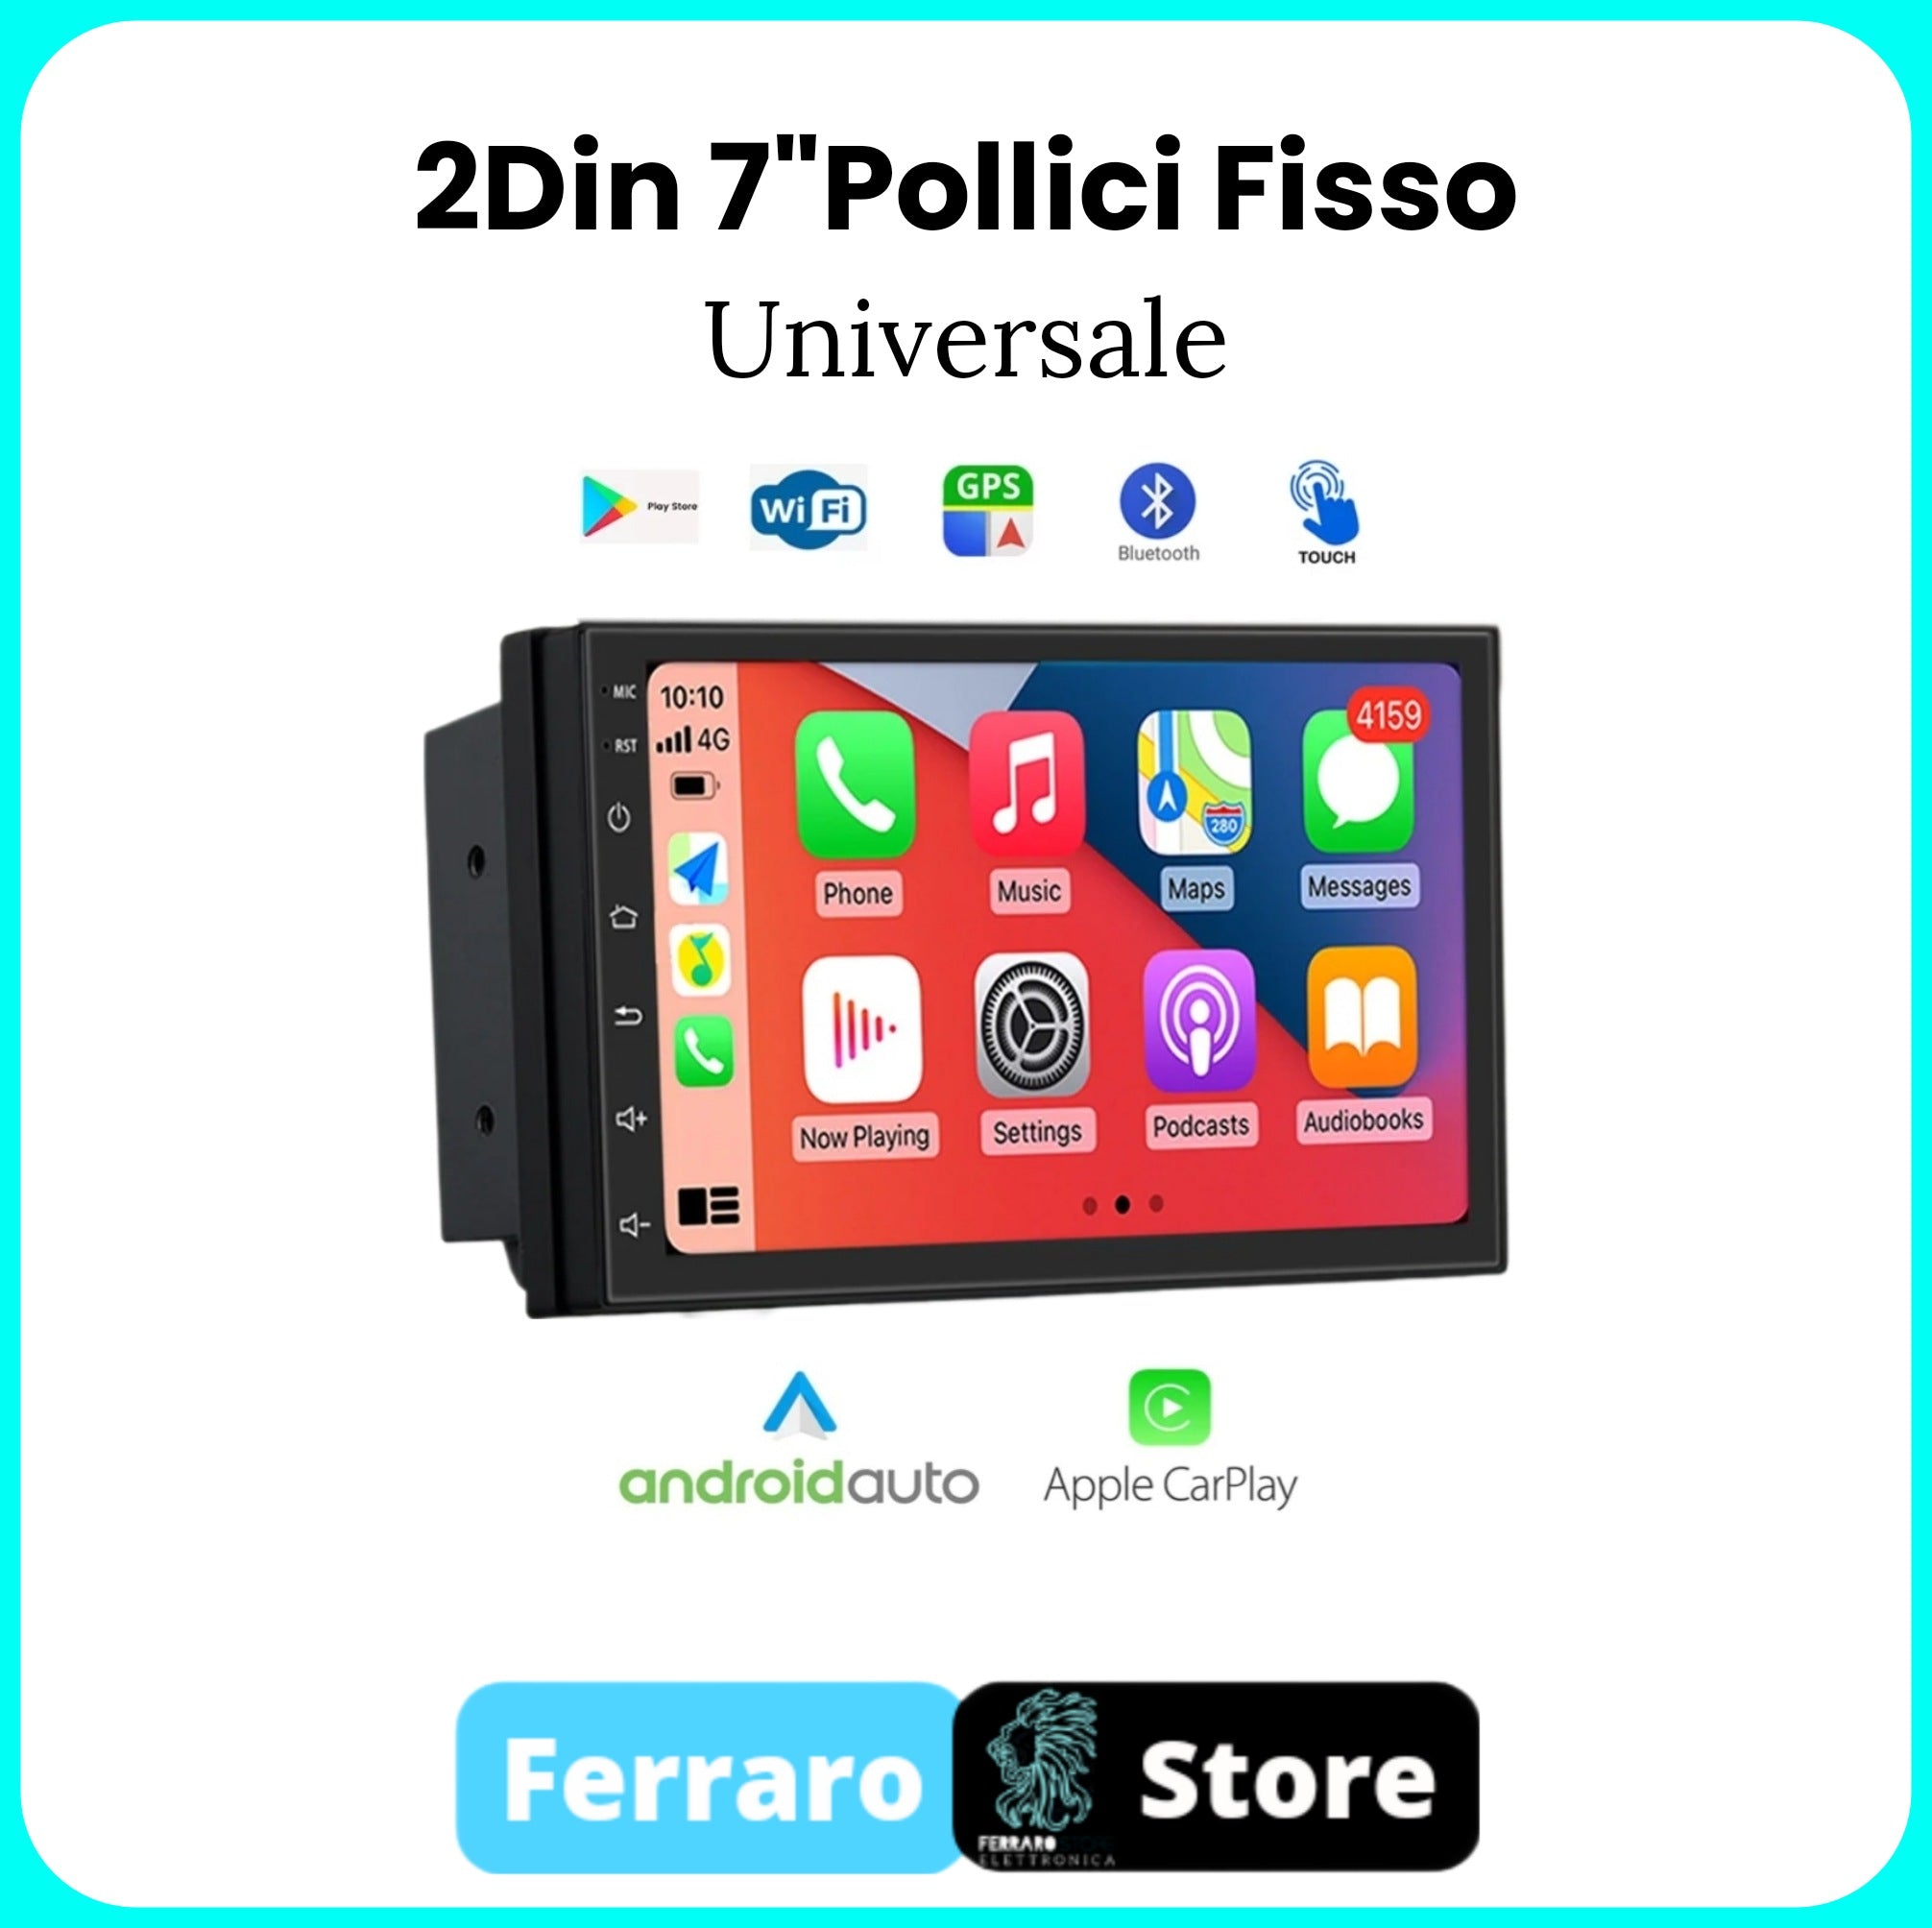 Autoradio Universale [FISSO] - 2Din 7"Pollici, Android, CarPlay & Android Auto, Bluetooth, Radio, GPS, Android, GPS, Youtube, PlayStore